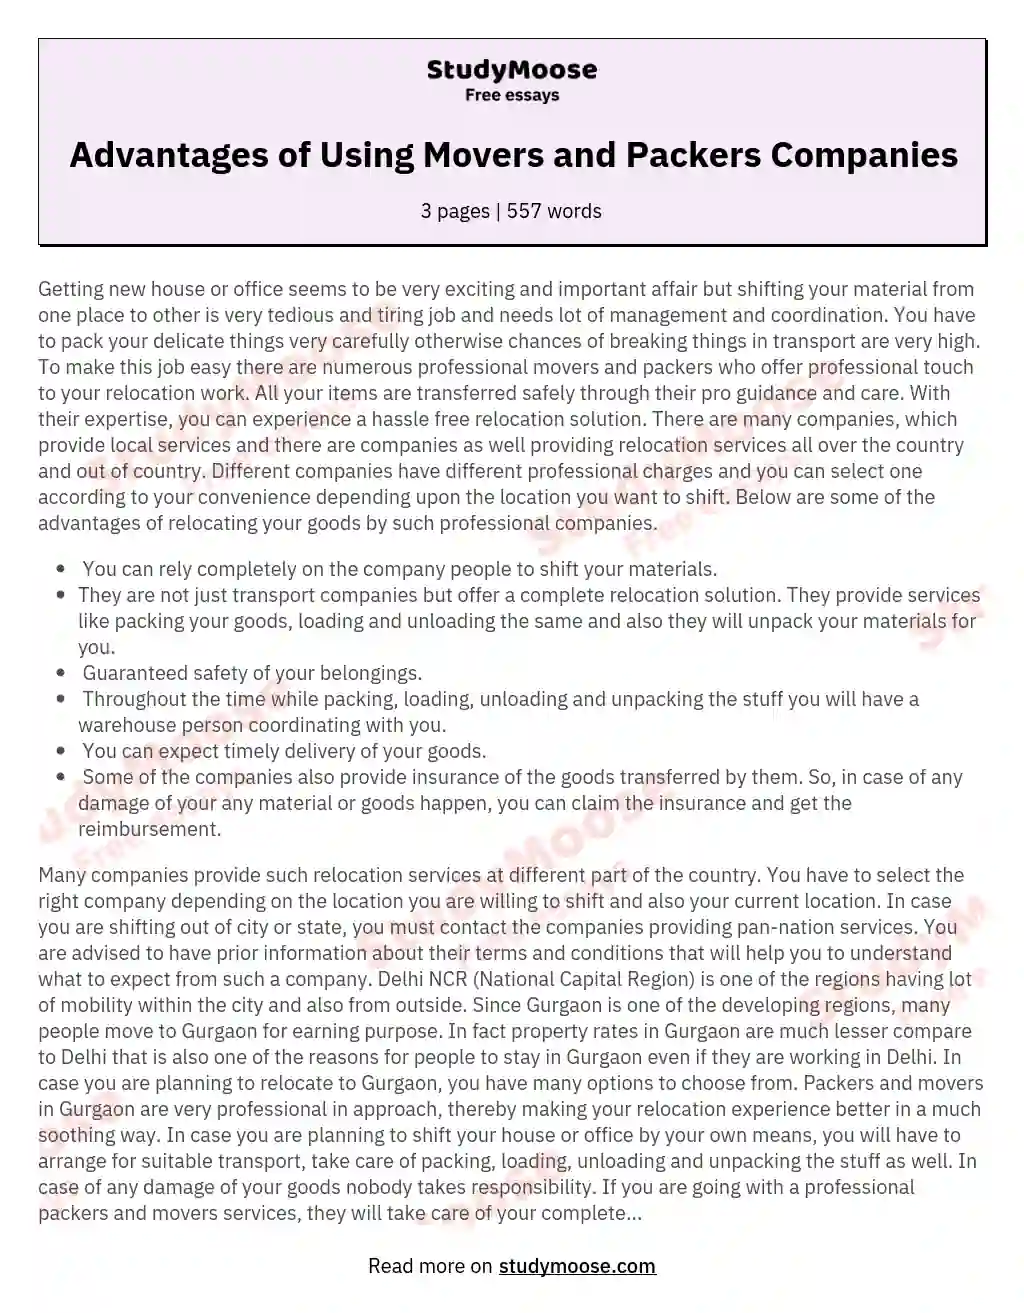 Advantages of Using Movers and Packers Companies essay